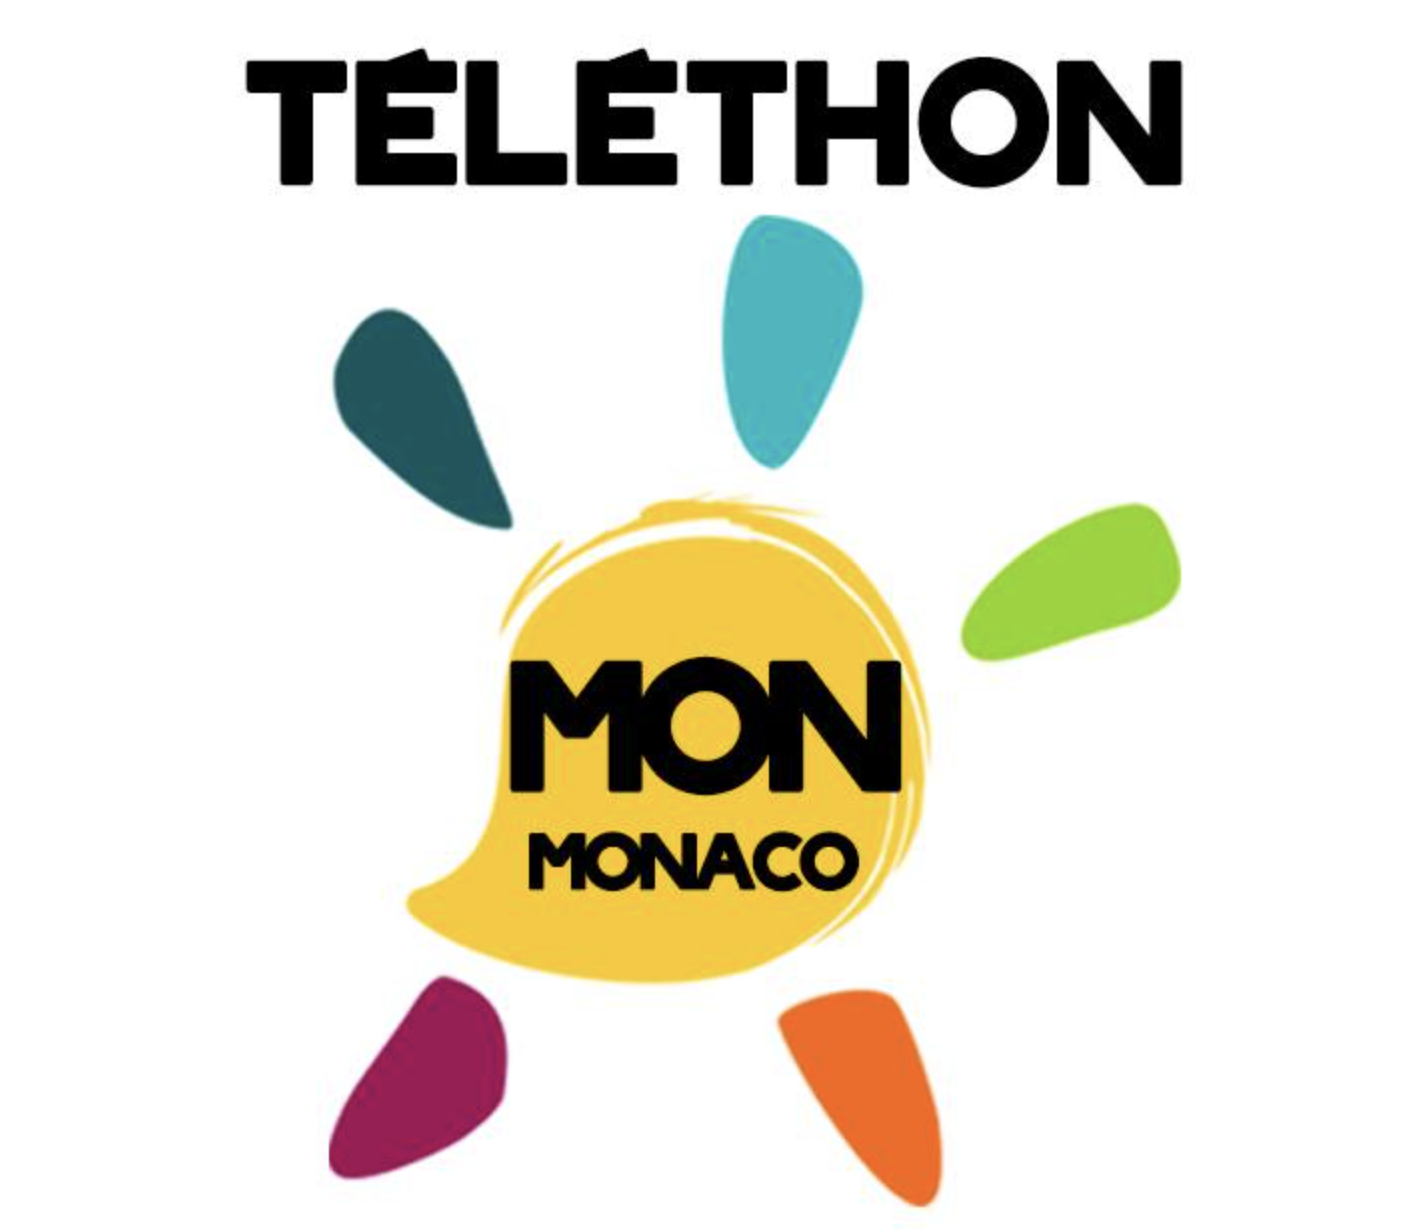 You are currently viewing ZUMBA Téléthon with Anette on December 9th and 10th in Monaco